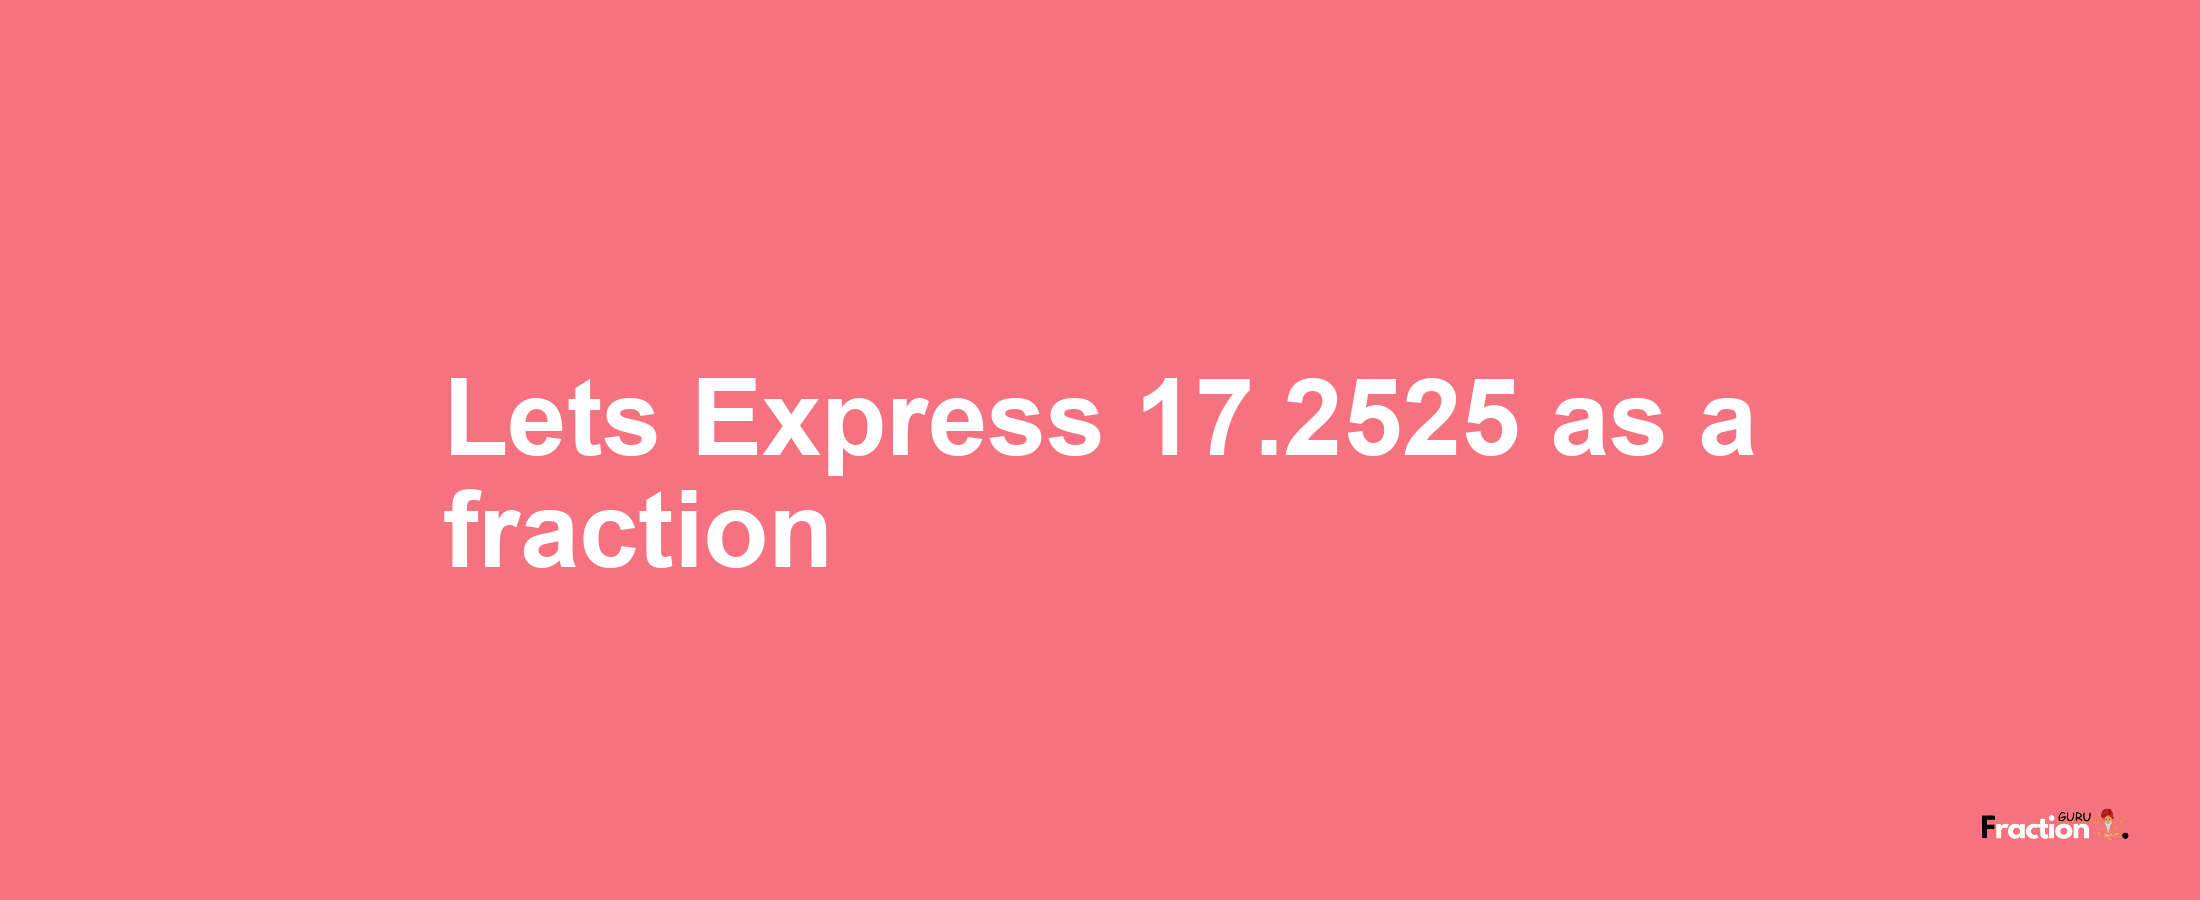 Lets Express 17.2525 as afraction